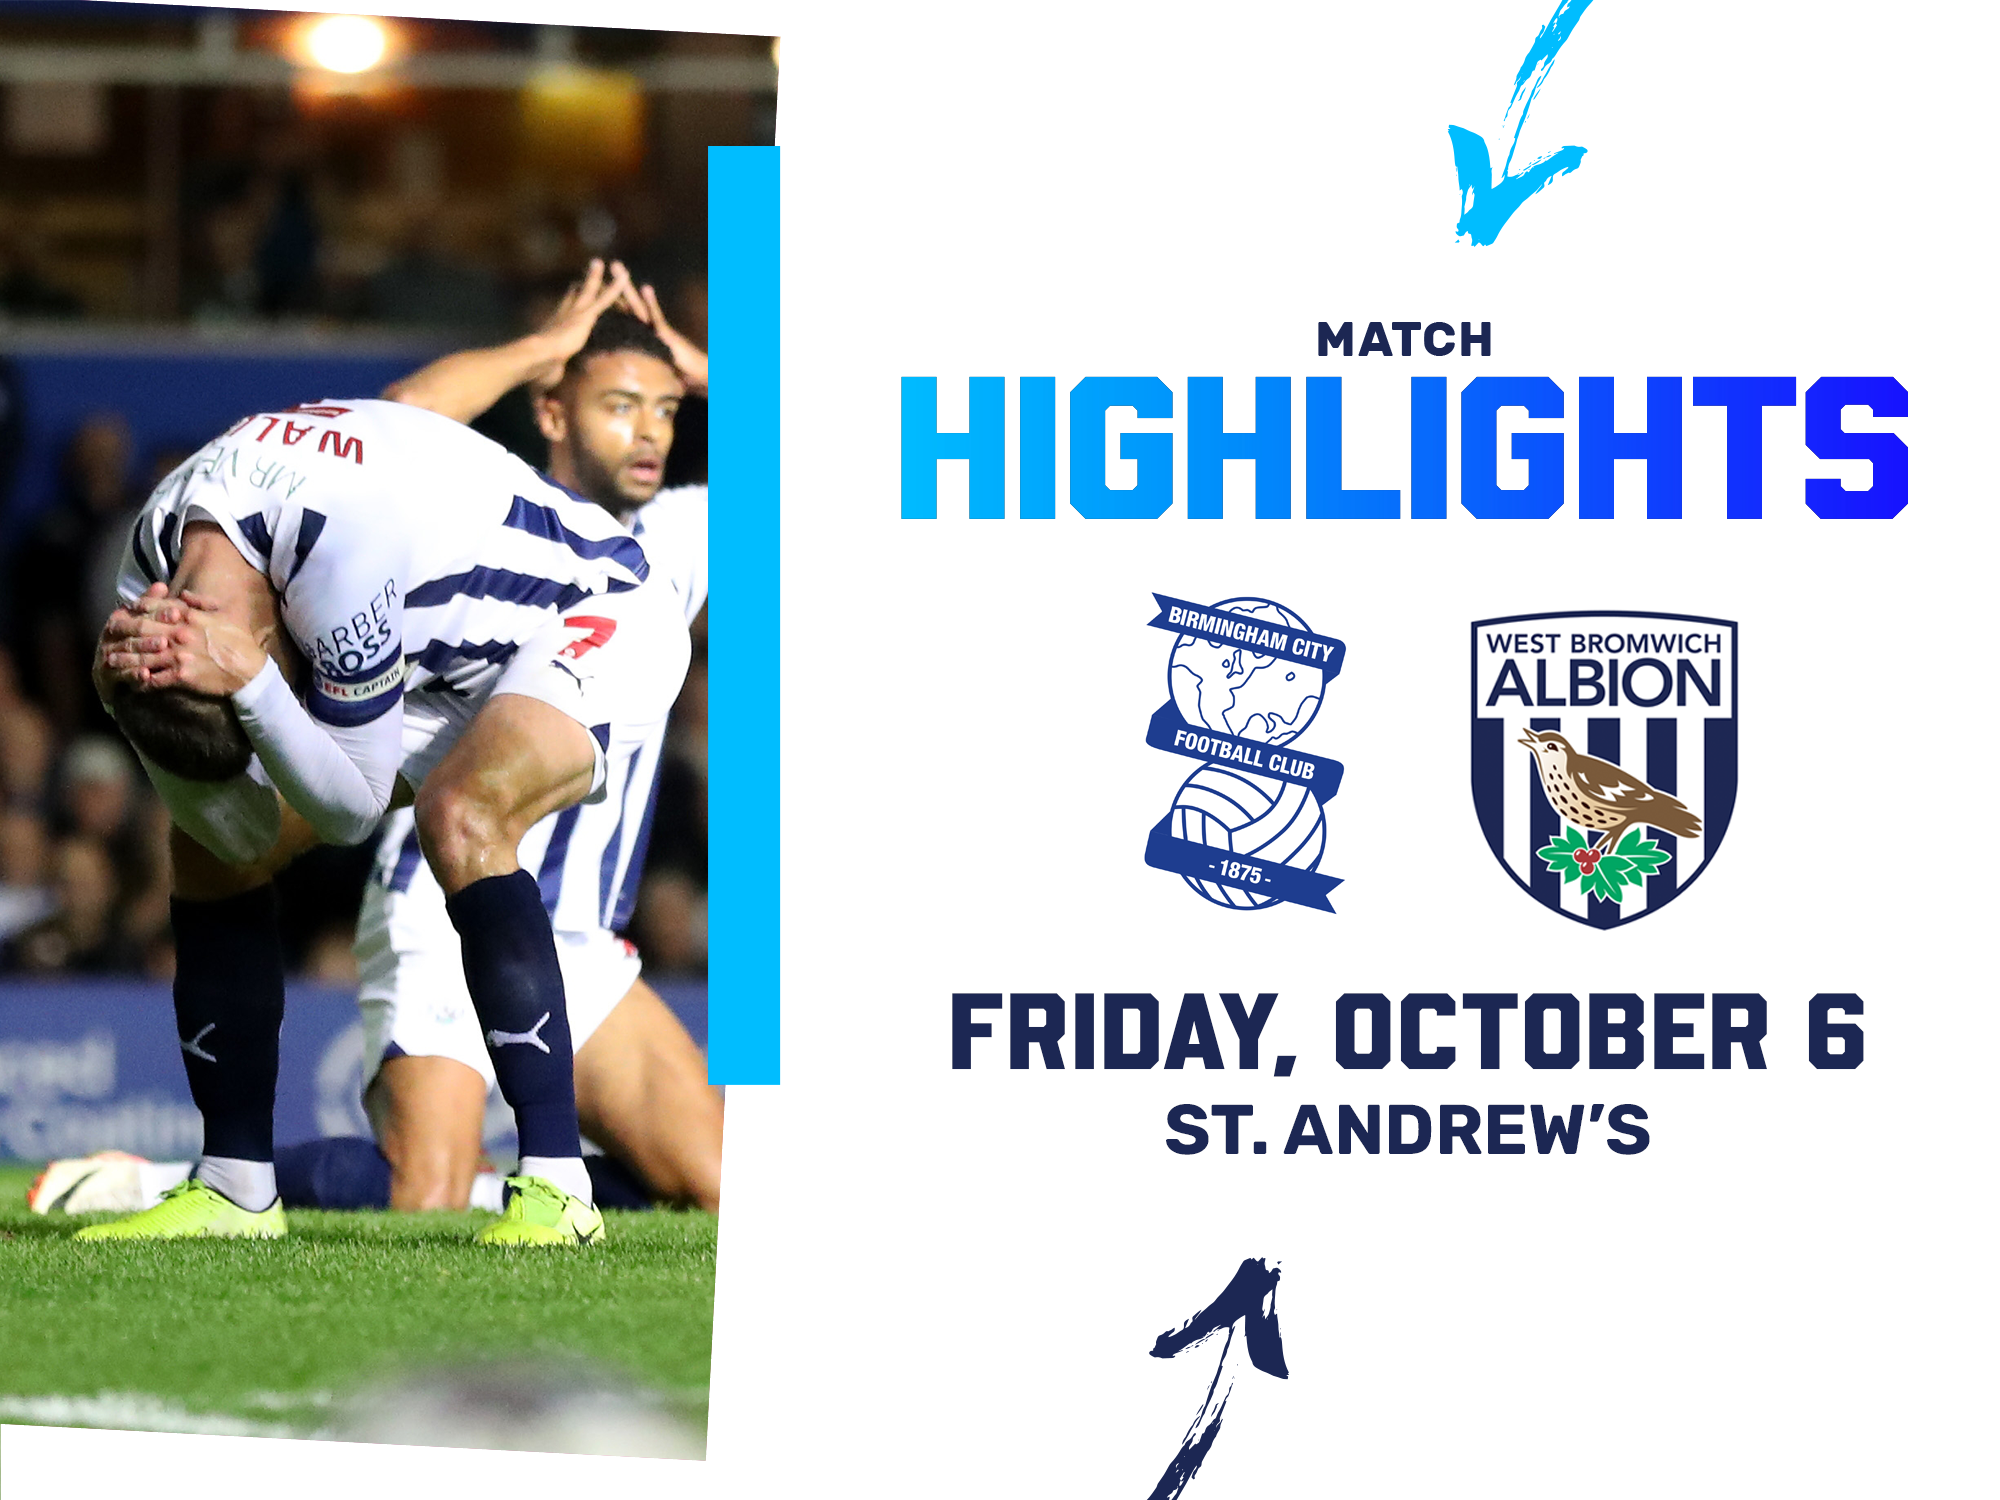 A photo graphic, showing Jed Wallace in the 23/24 home colours with his head in his hands, during Albion's clash with Birmingham City at St. Andrew's